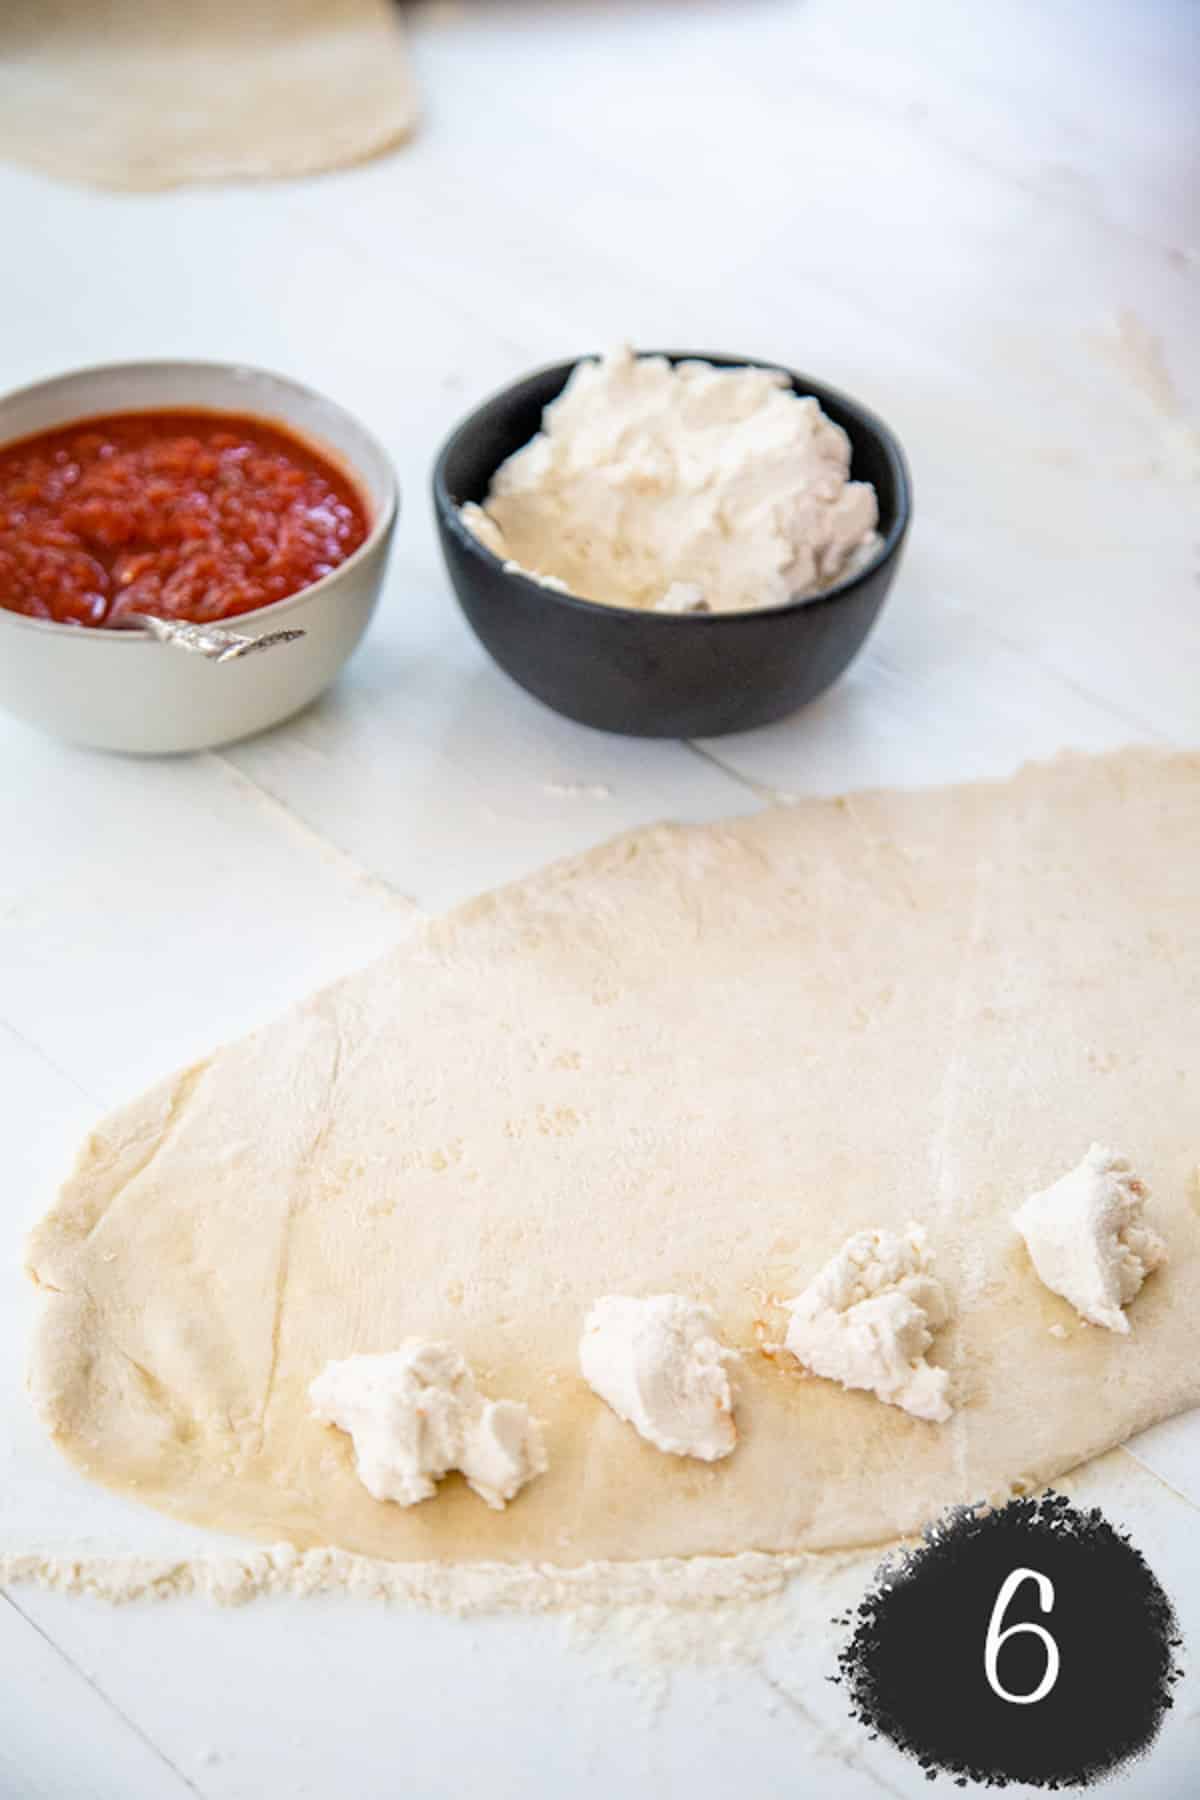 Dollops of cheese spread evenly on rolled out pizza dough.